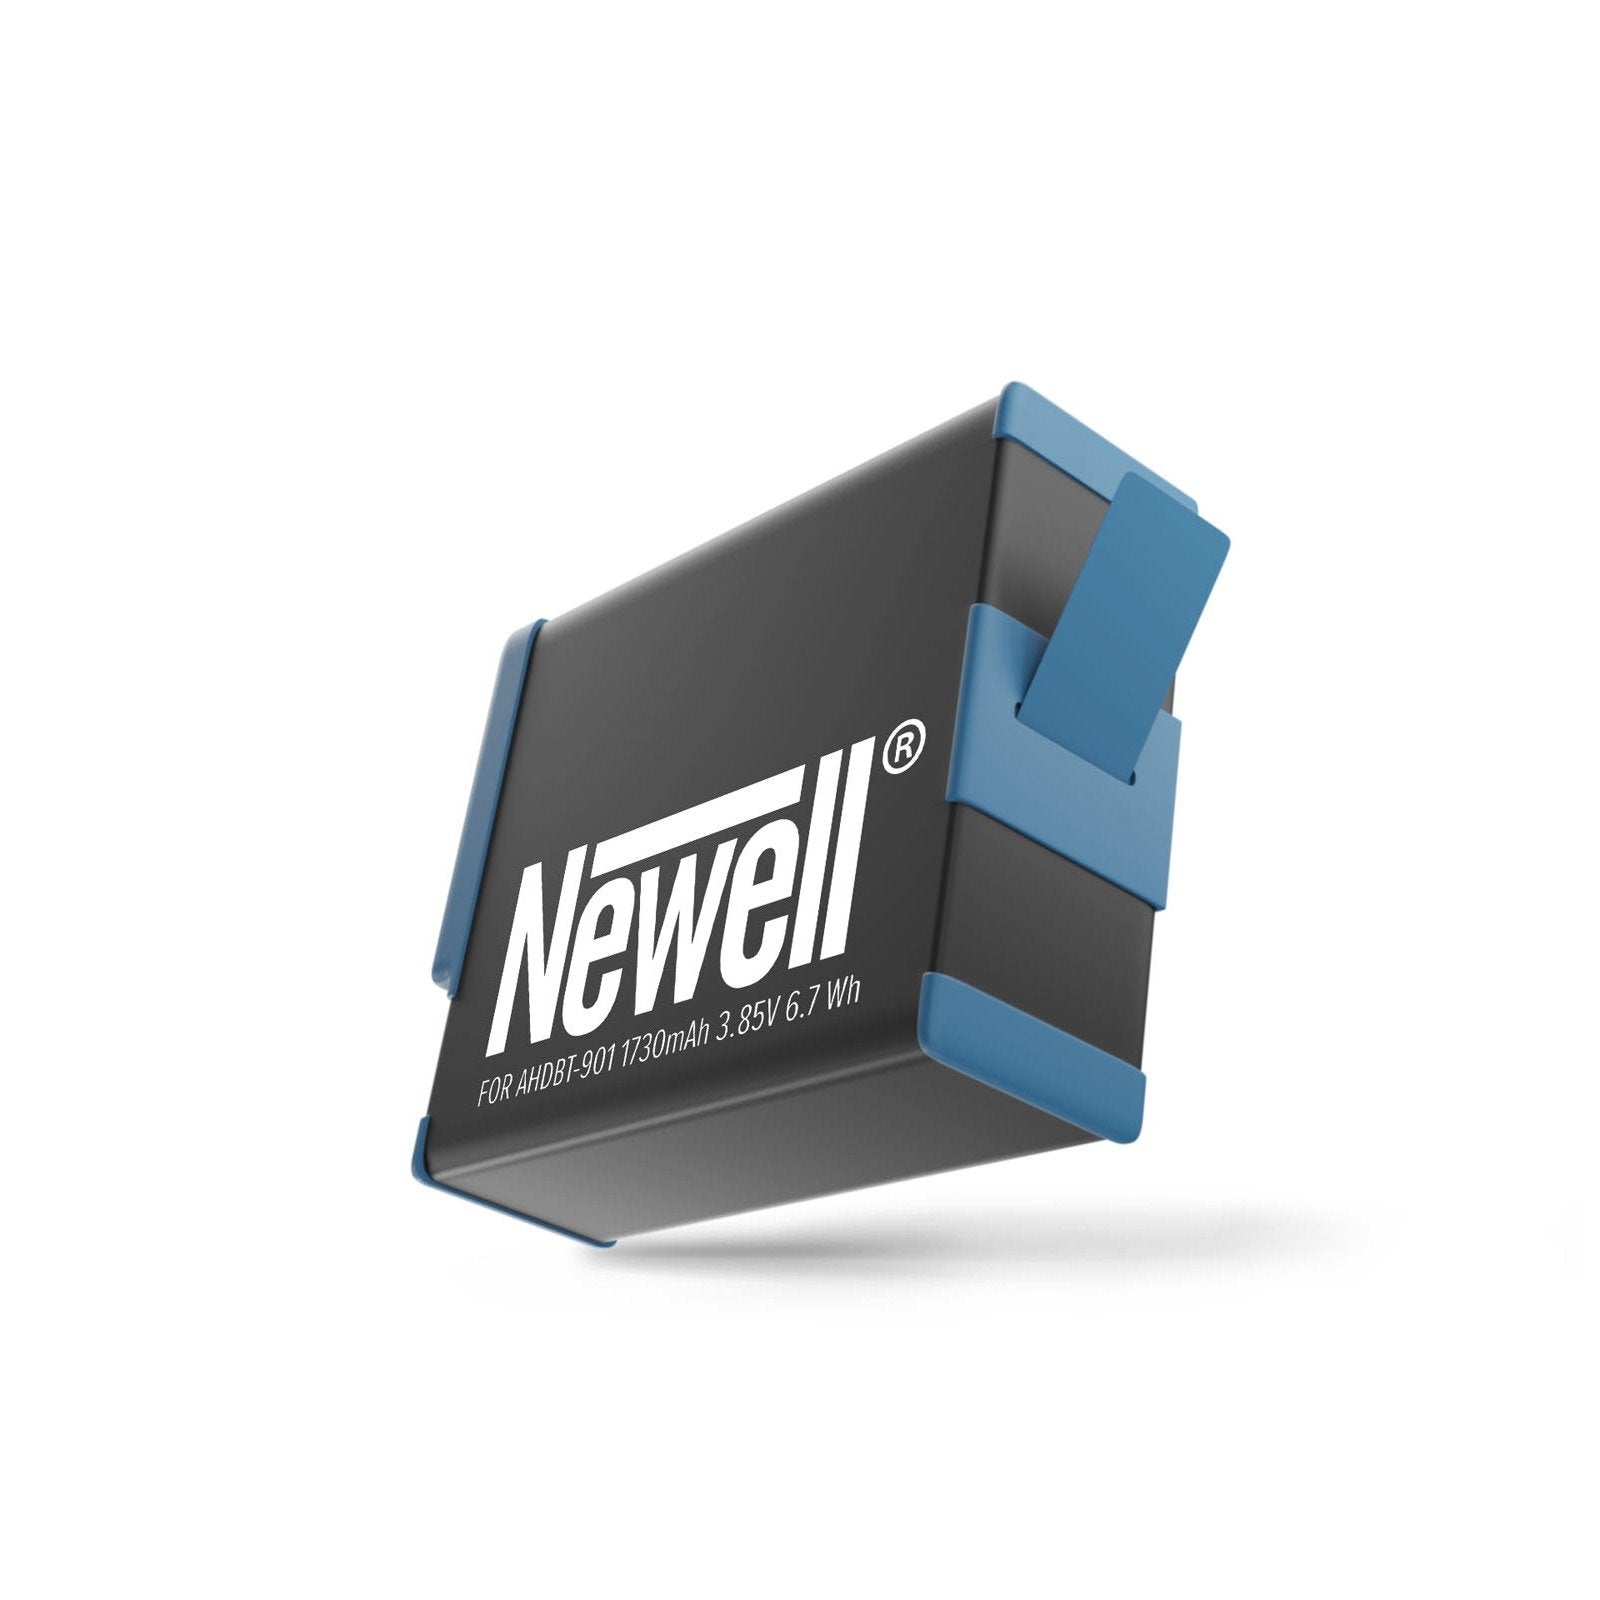 Newell AHDBT-901 battery for GoPro Hero 9 and 10